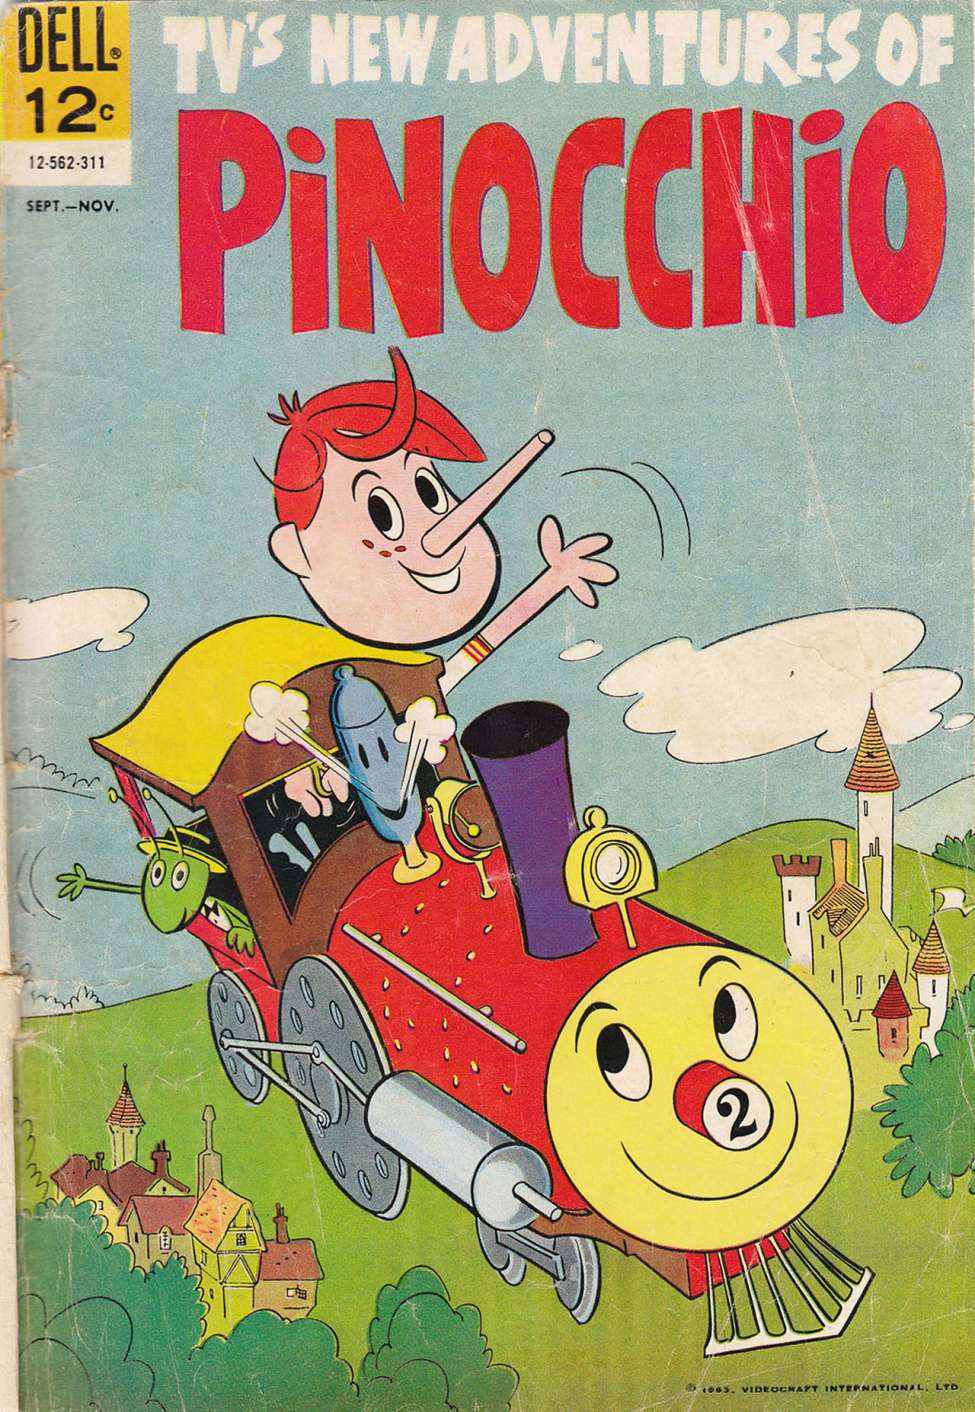 Book Cover For New Adventures of Pinocchio 3